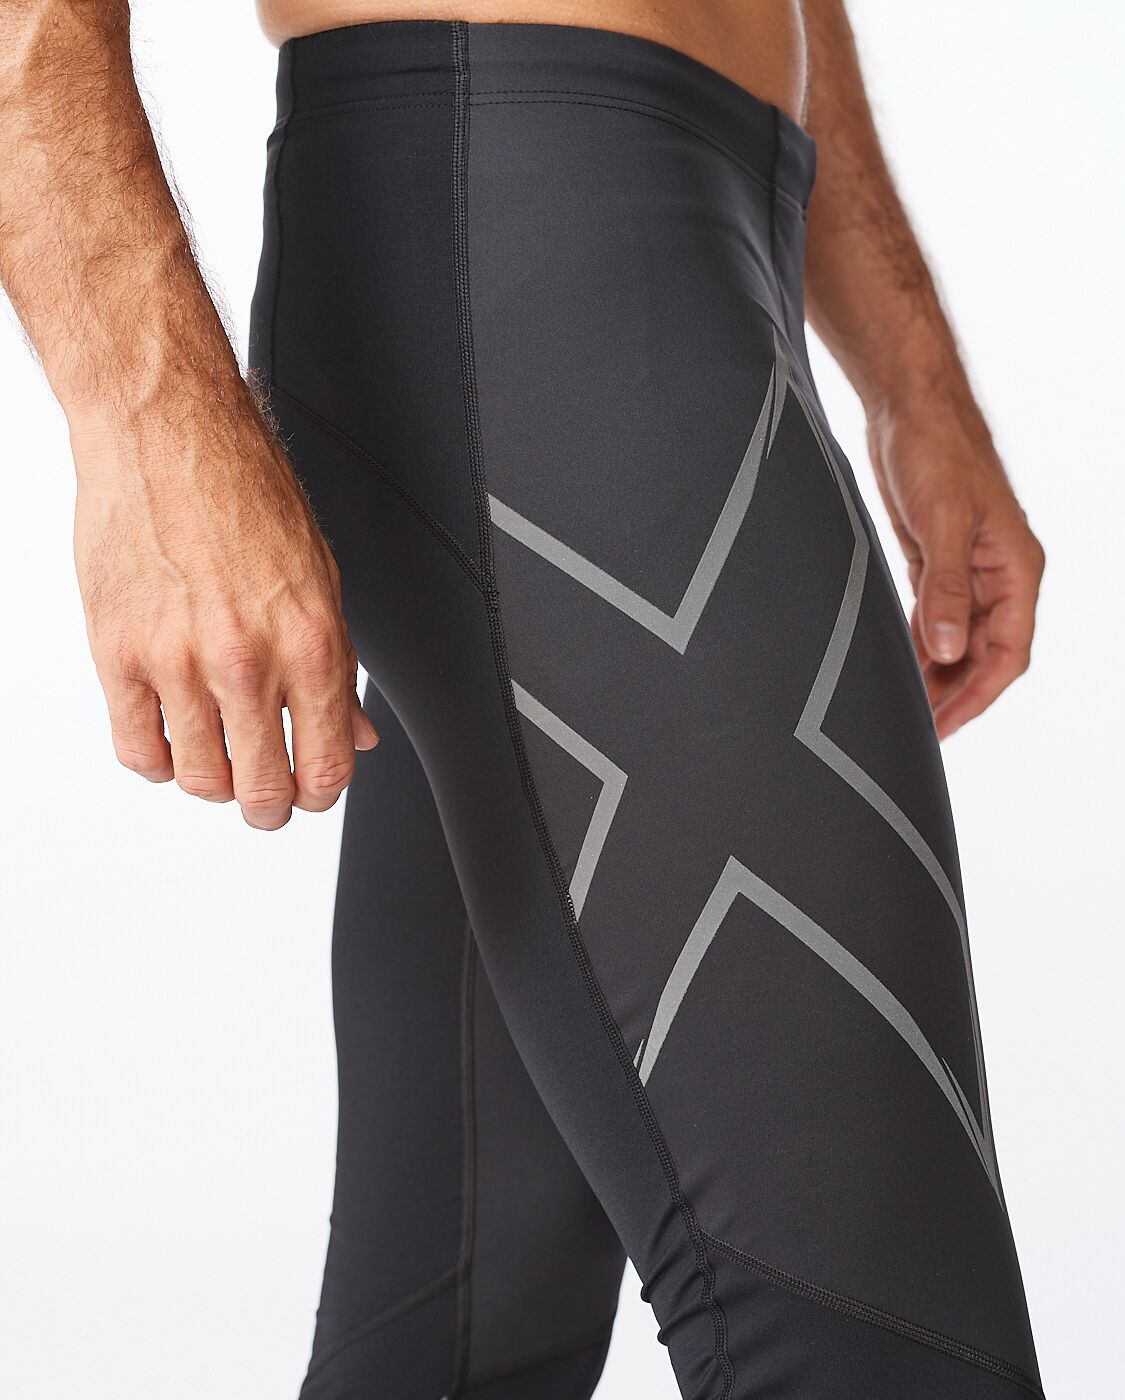 2XU South Africa - Mens Ignition Shield Compression Tights - Black/Black Reflective